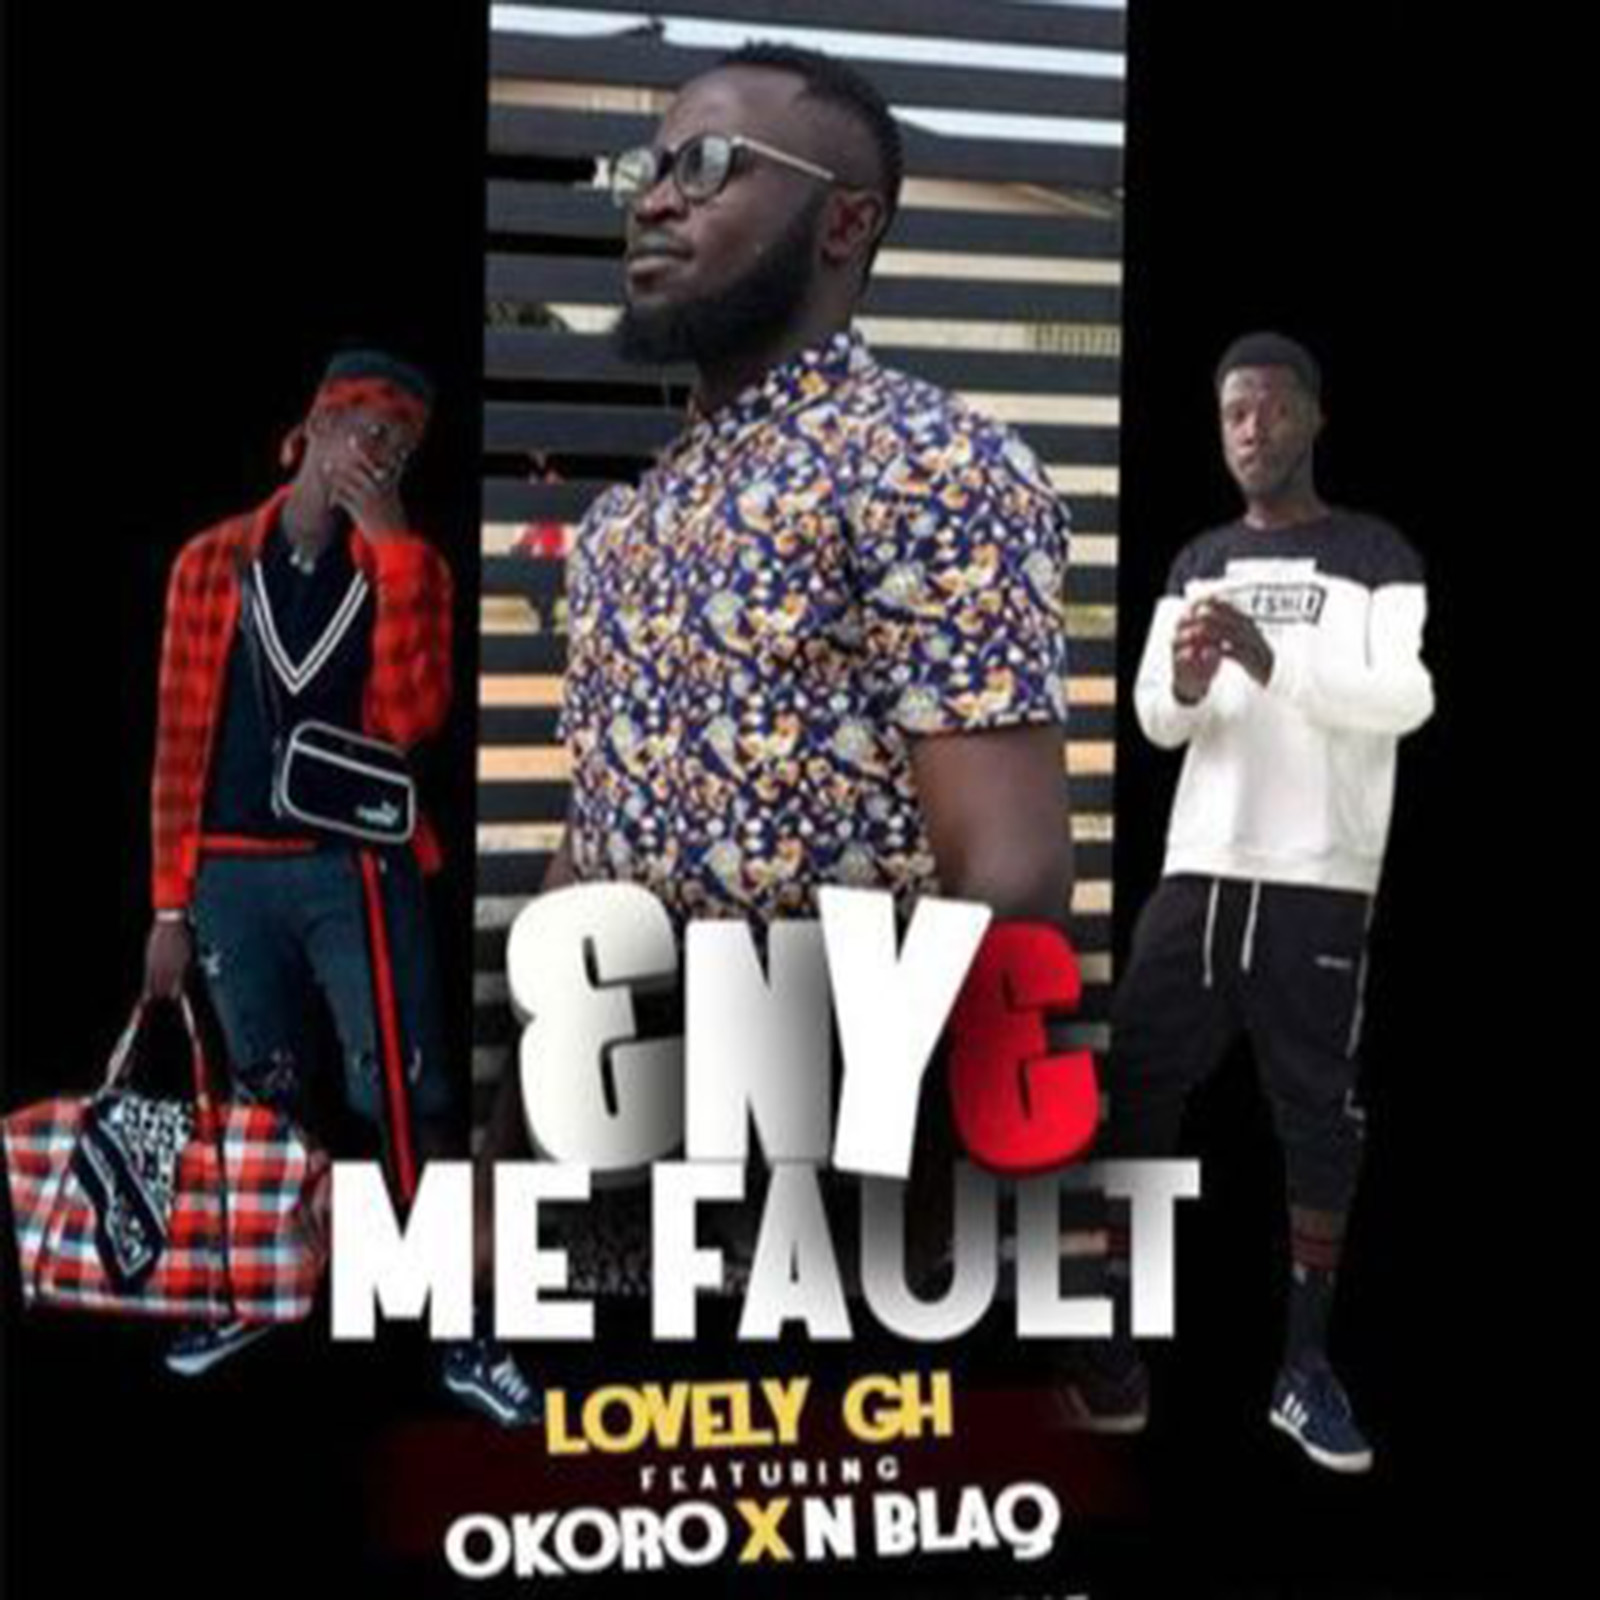 Enye Me Fault by Lovely GH feat. Okoro & Nblaq